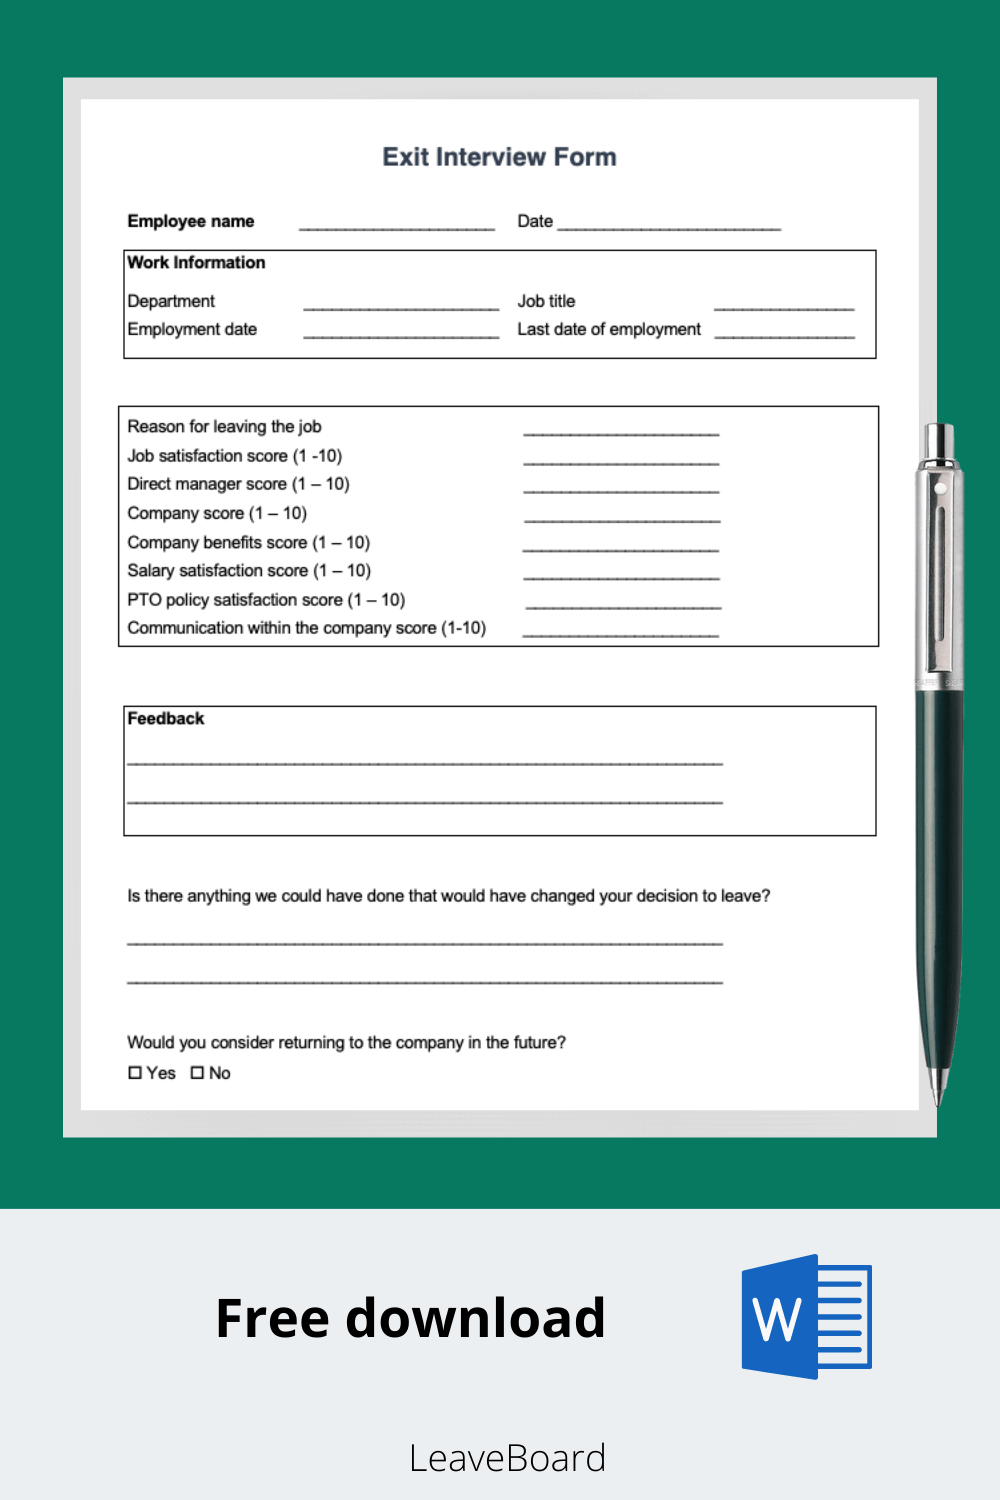 Exit Interview Template (Employee Questionnaire)